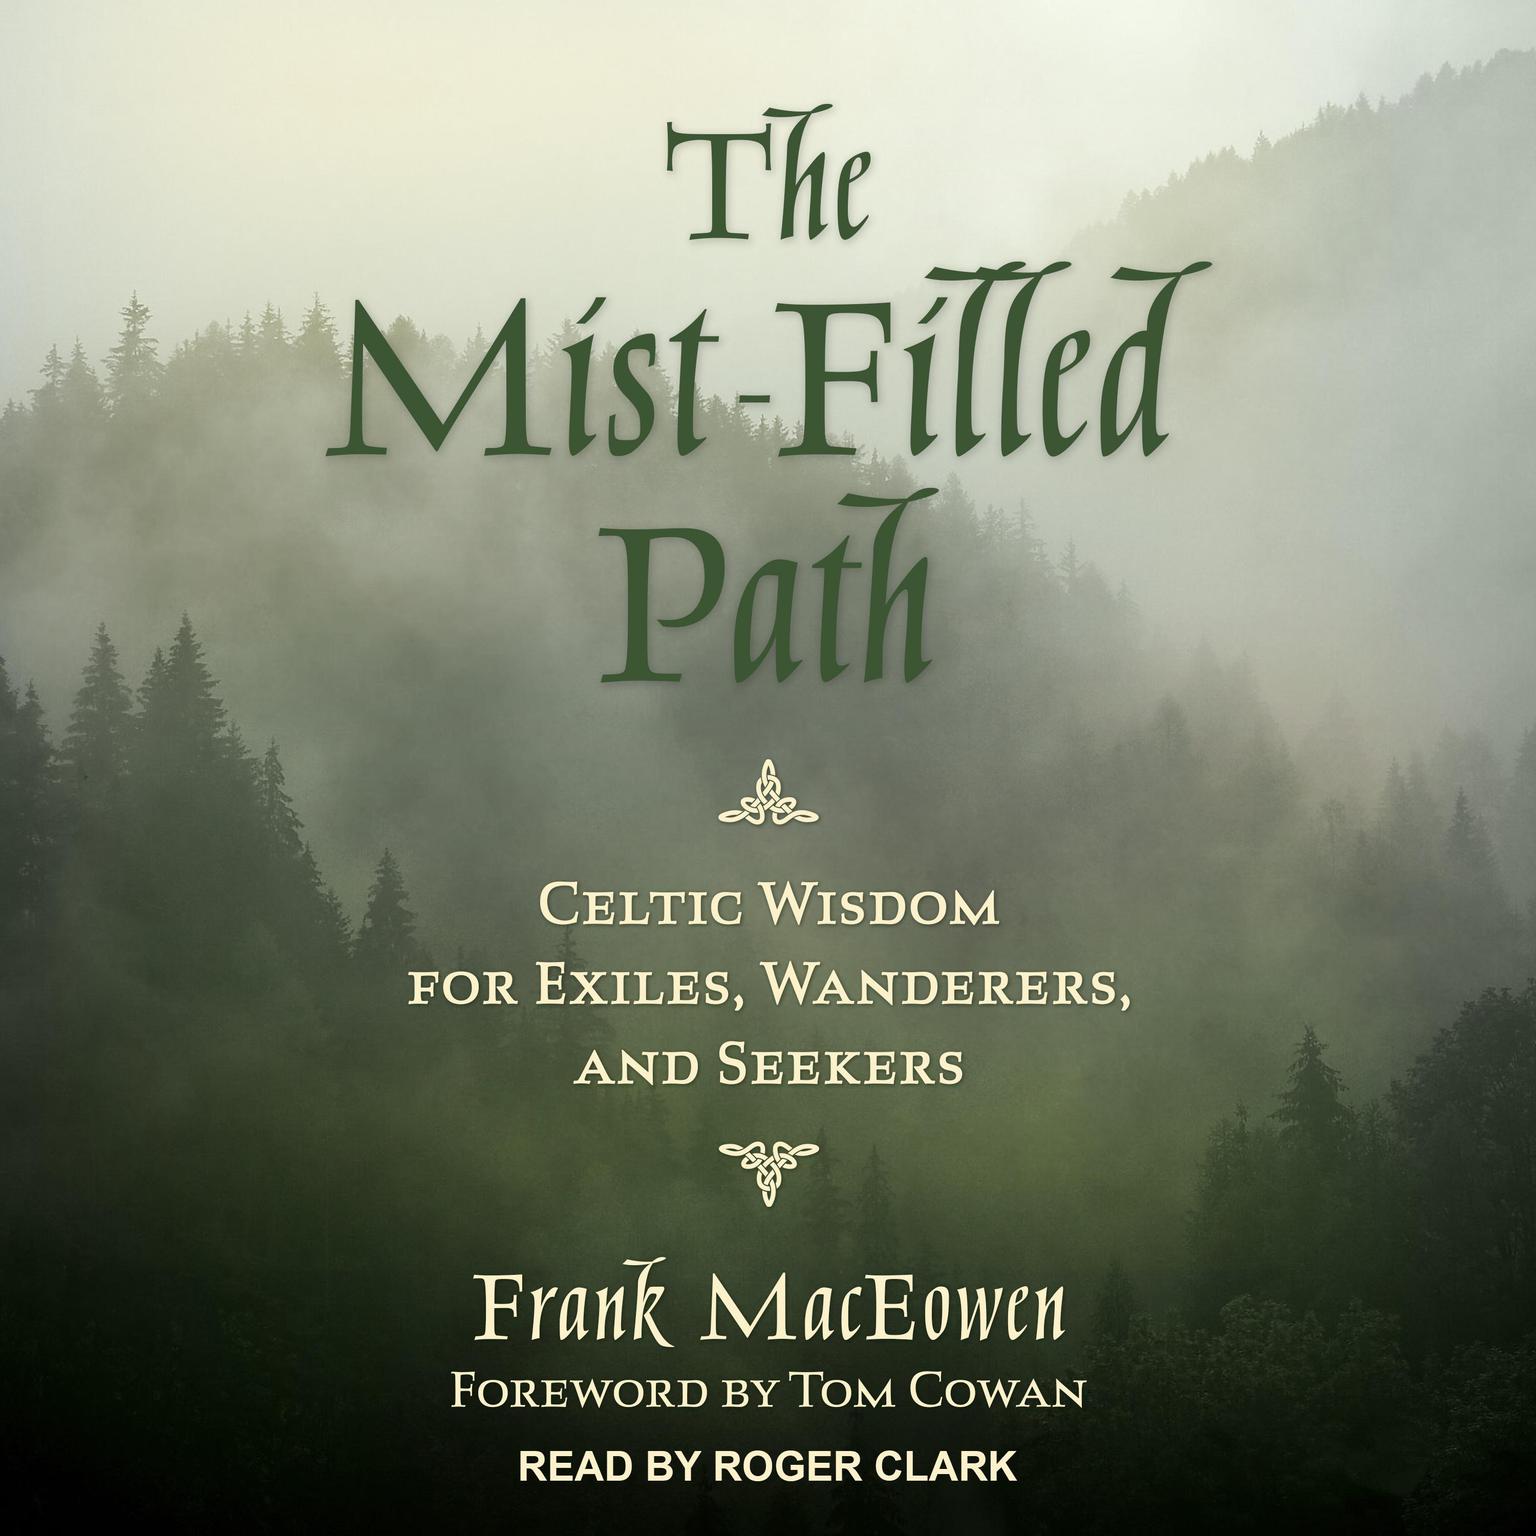 The Mist-Filled Path: Celtic Wisdom for Exiles, Wanderers, and Seekers Audiobook, by Frank MacEowen